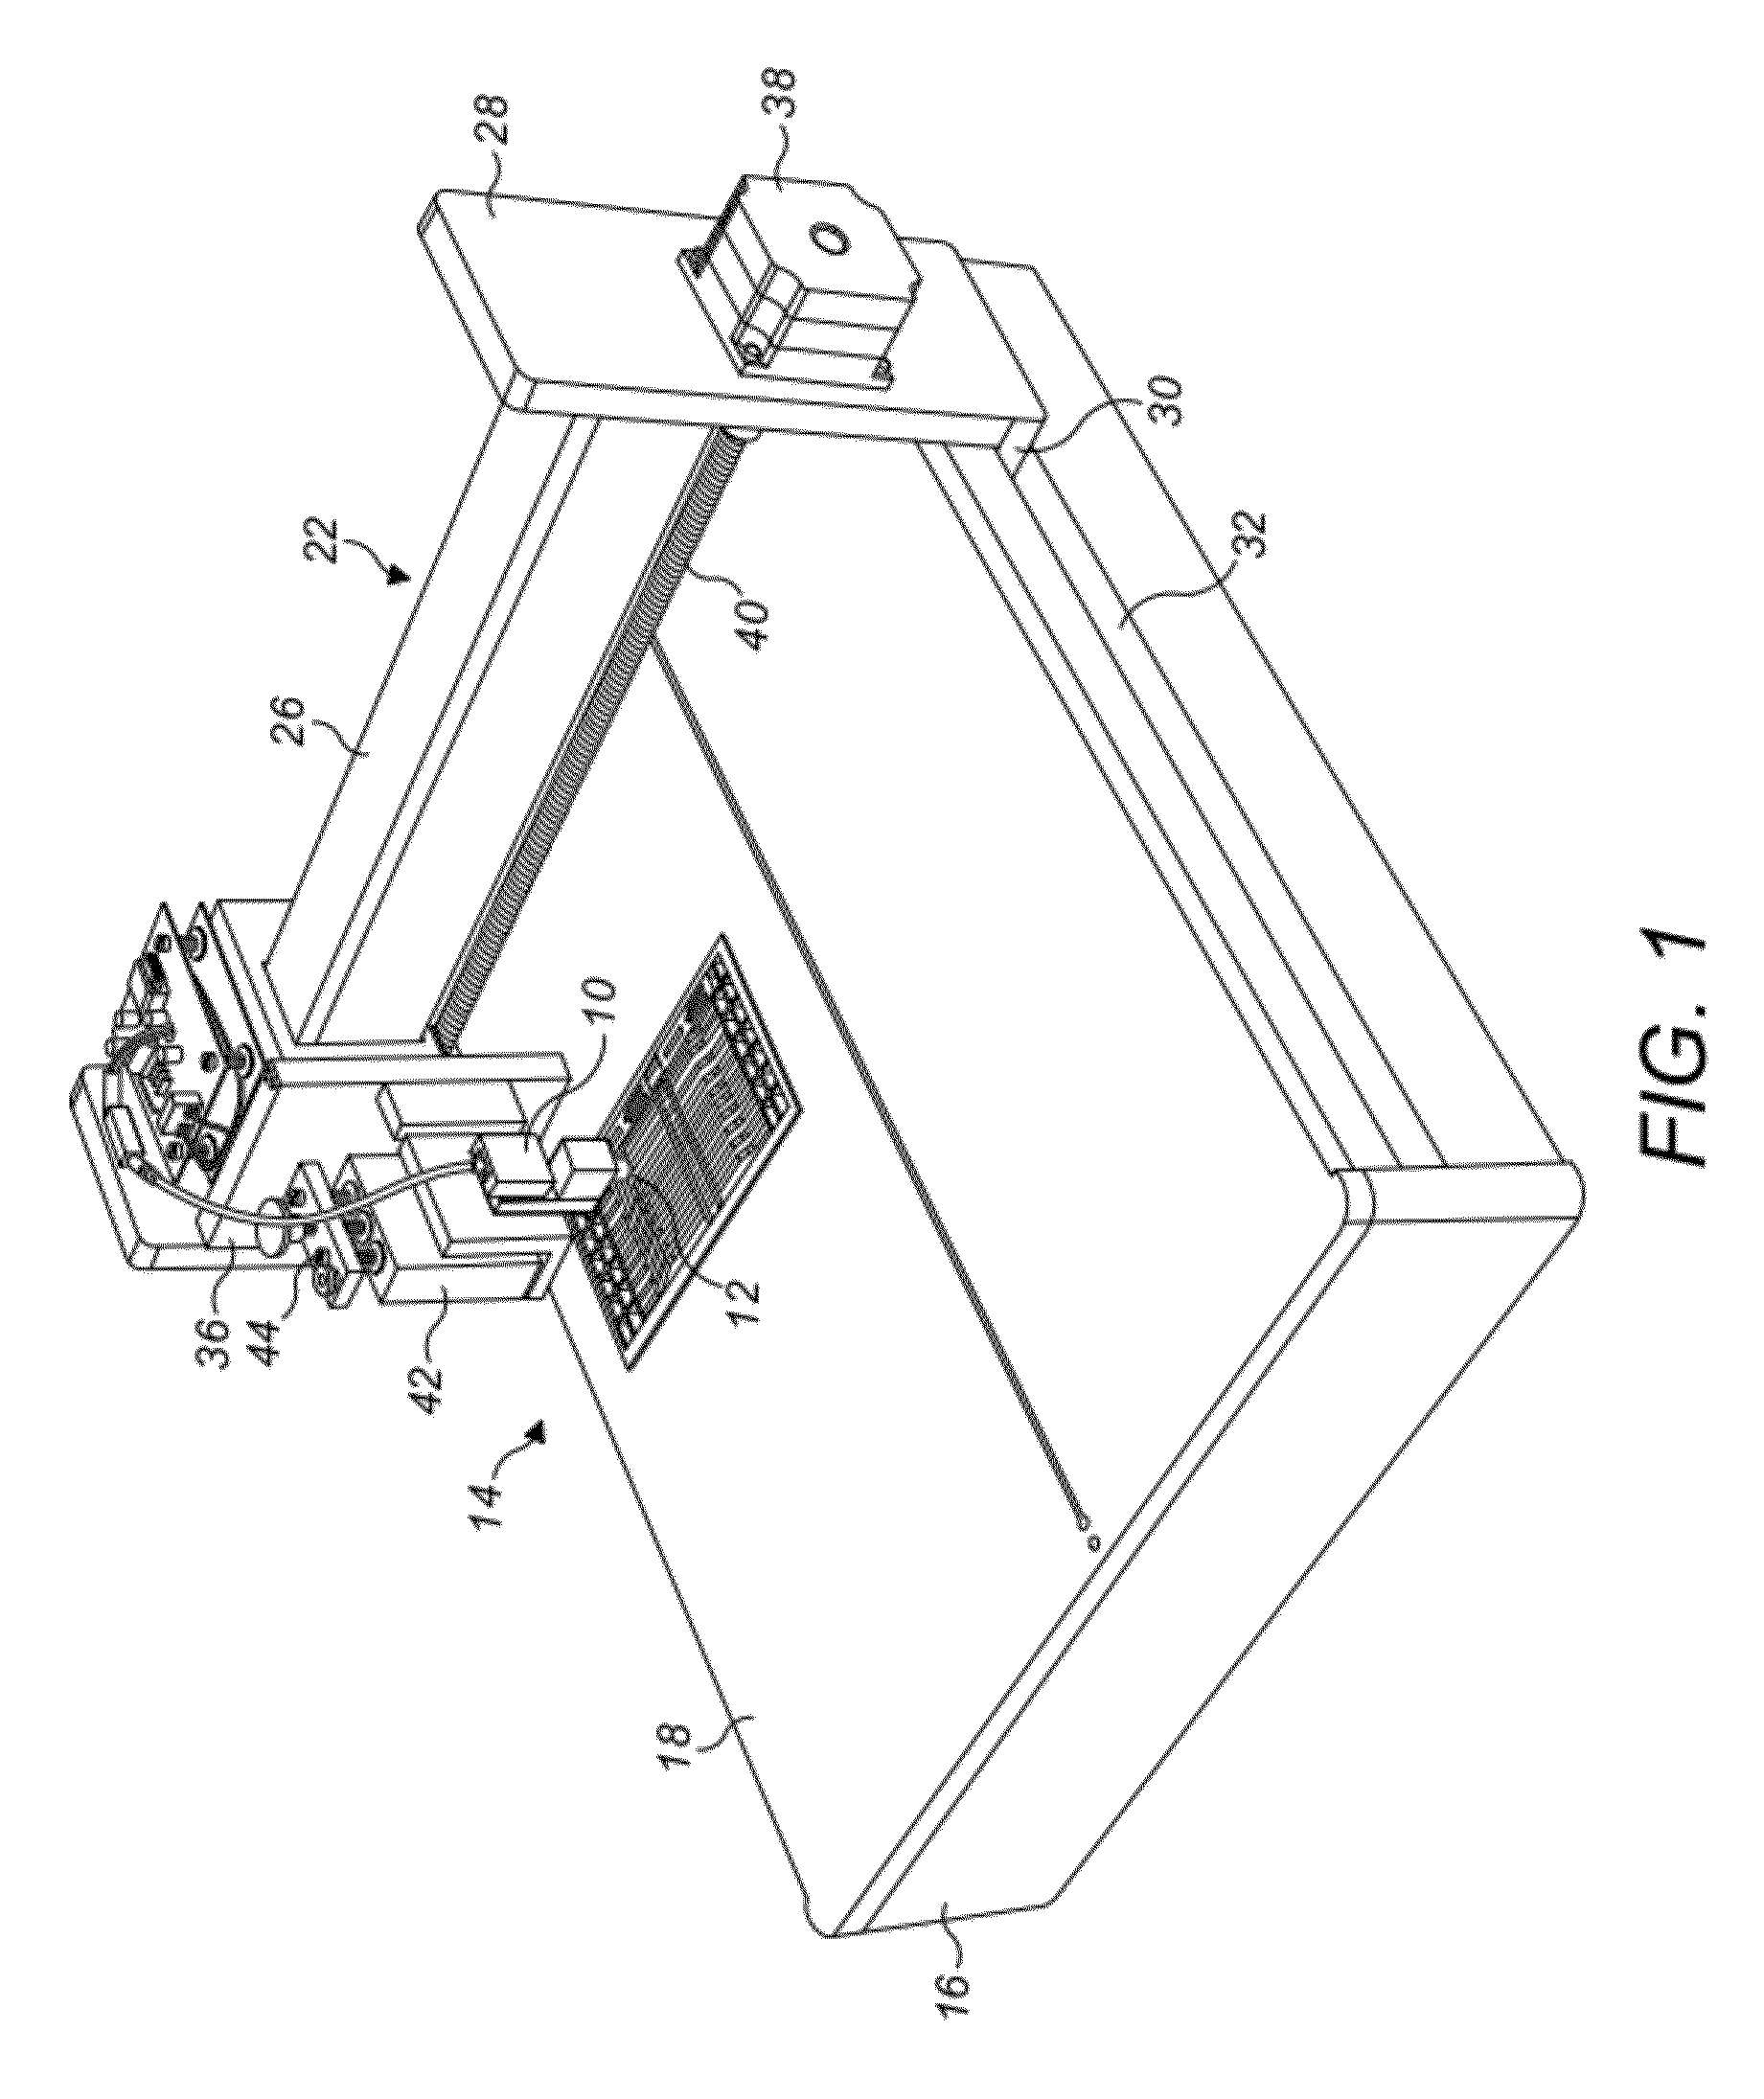 Apparatus and method for measuring charge density distribution